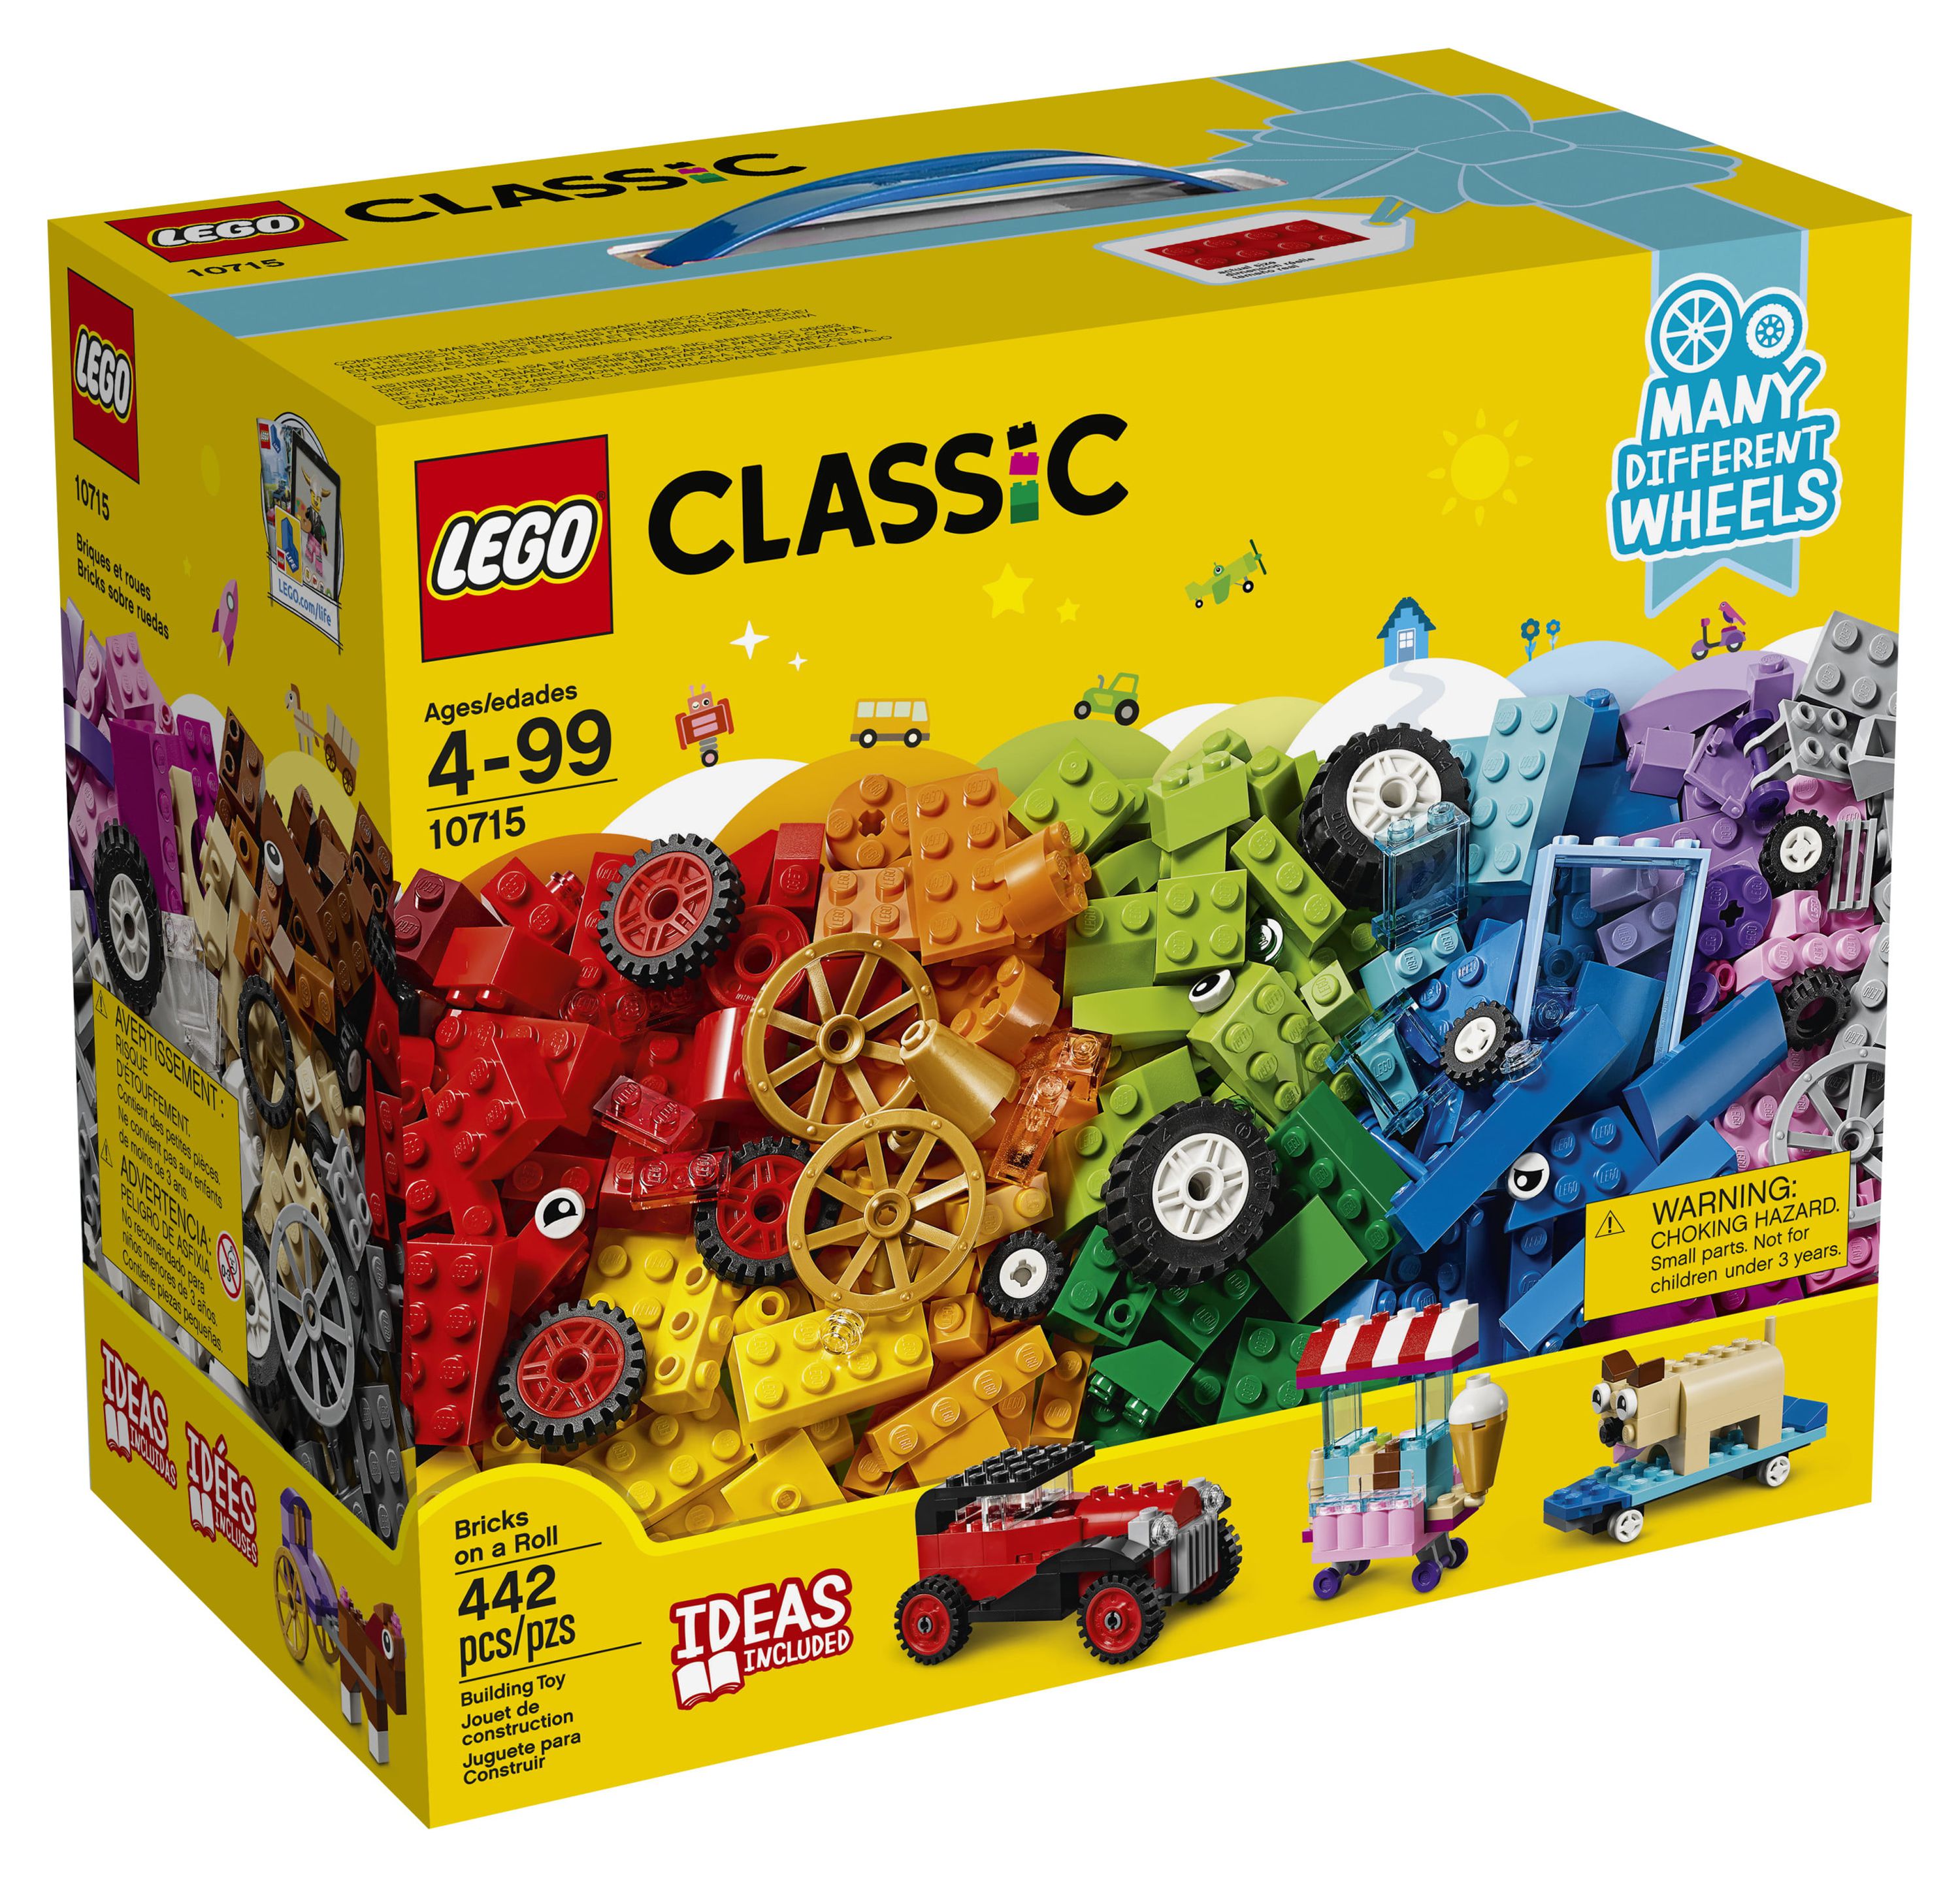 LEGO Classic Bricks on a Roll 10715 Building Set (442 Pieces) - image 4 of 10